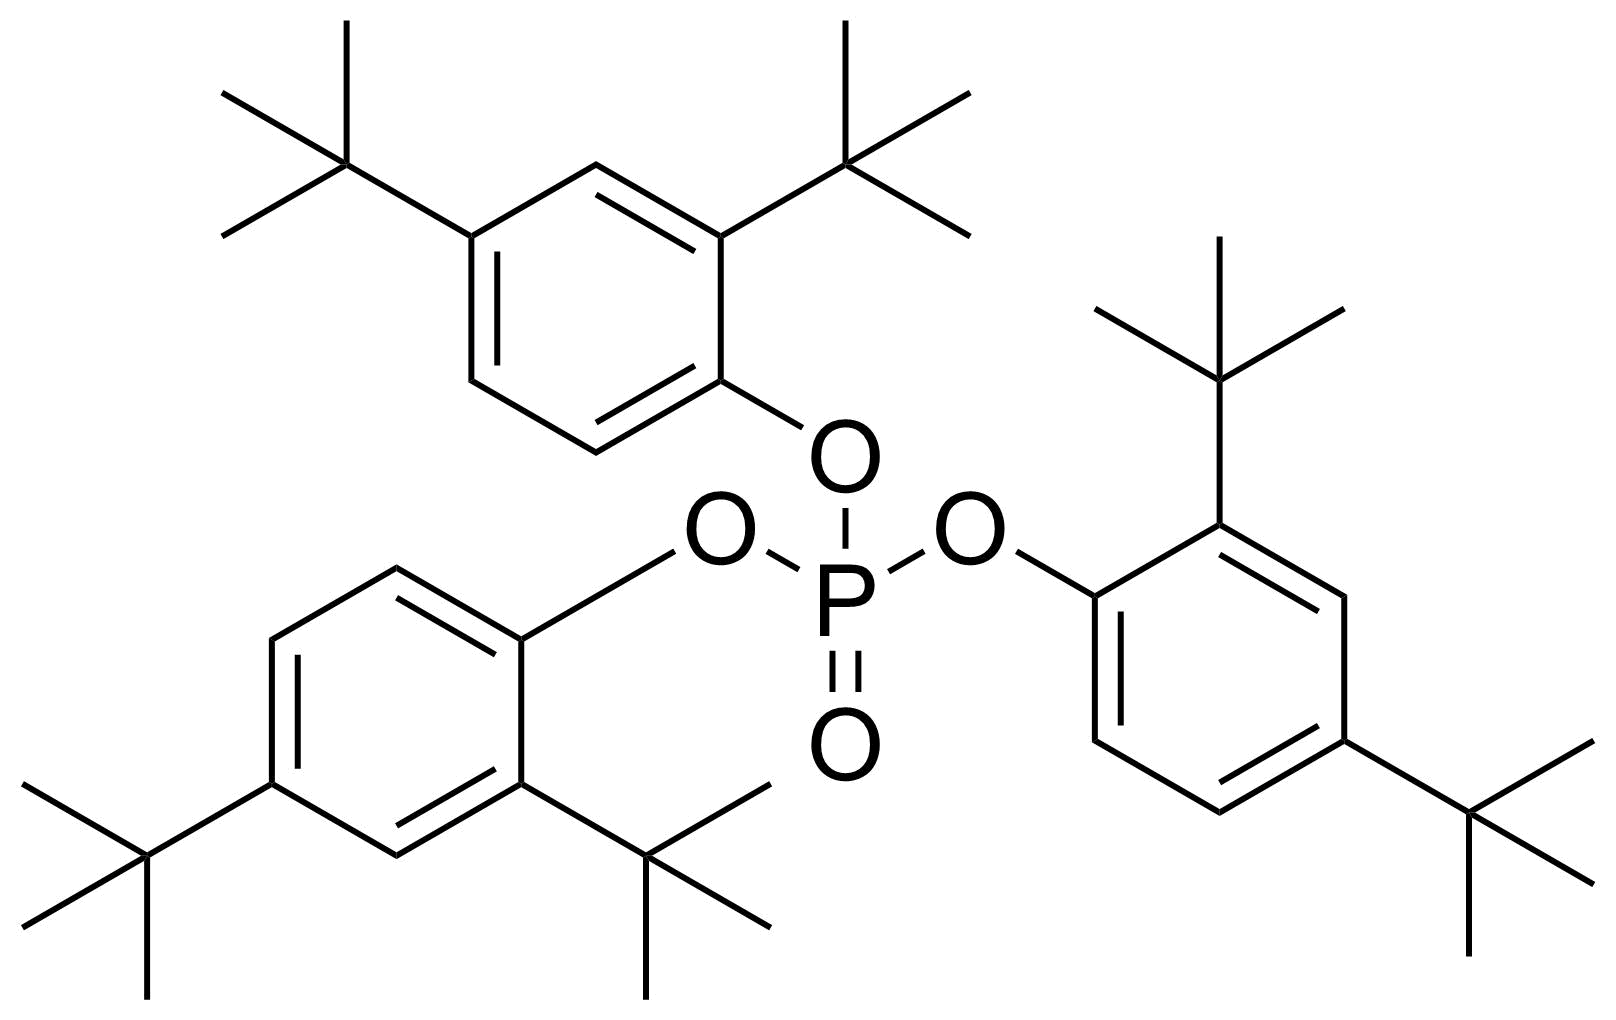 Structure of Tris(2,4-di-tert-butylphenyl)phosphate